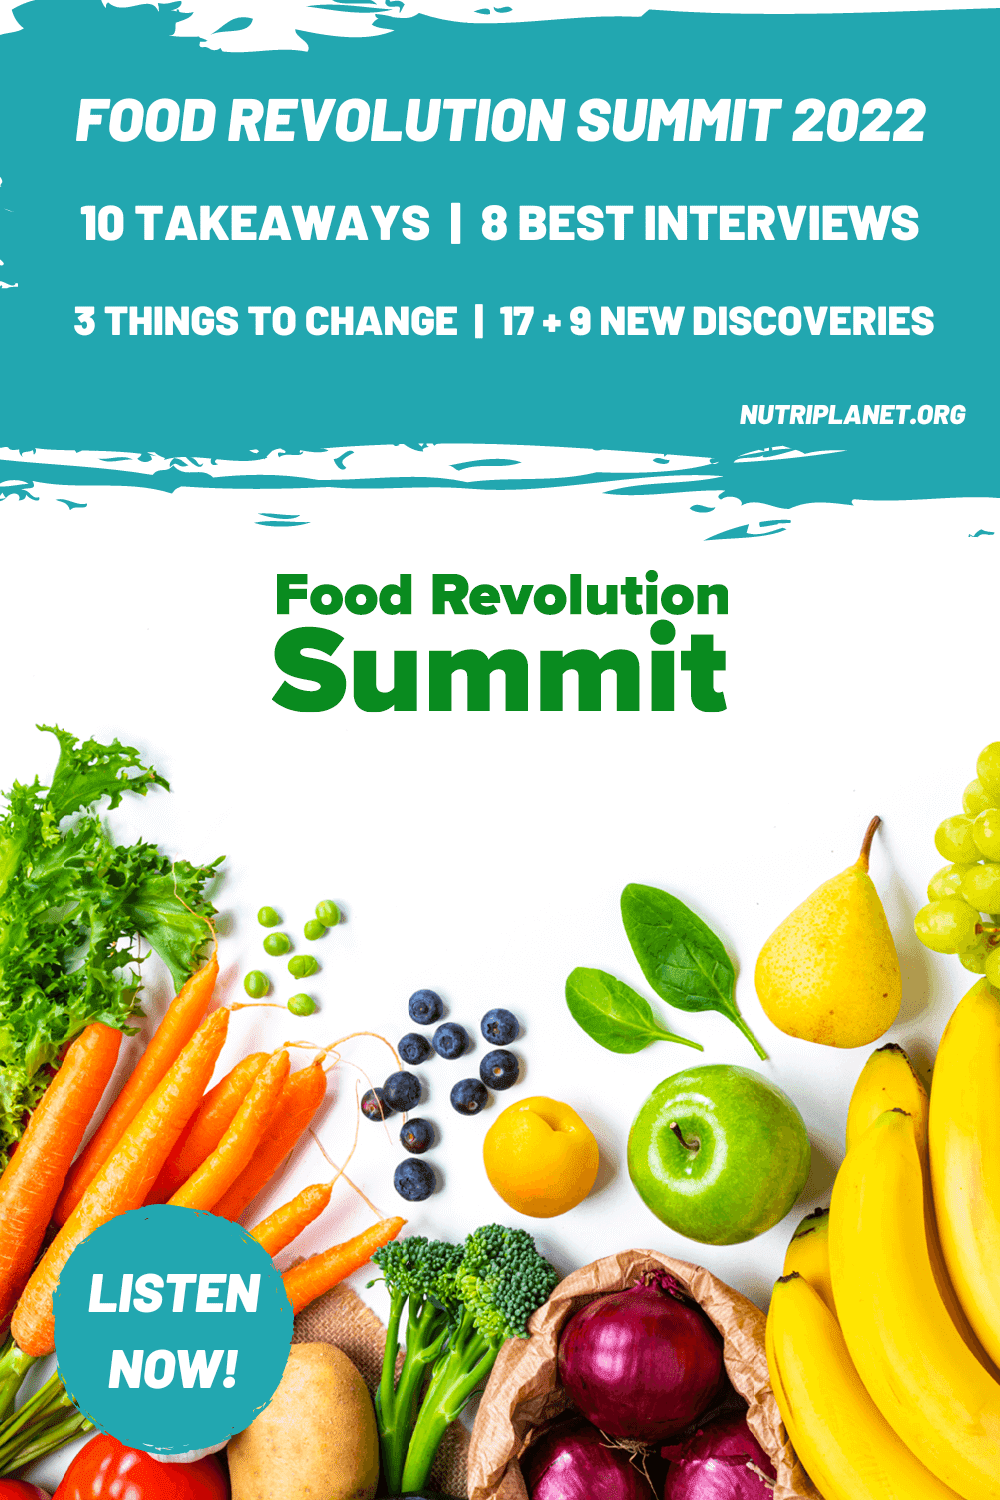 Food Revolution Summit 2022: 10 Takeaways, 17 + 9 discoveries, 3 changes that I'll make, and 8 interviews that I recommend. 